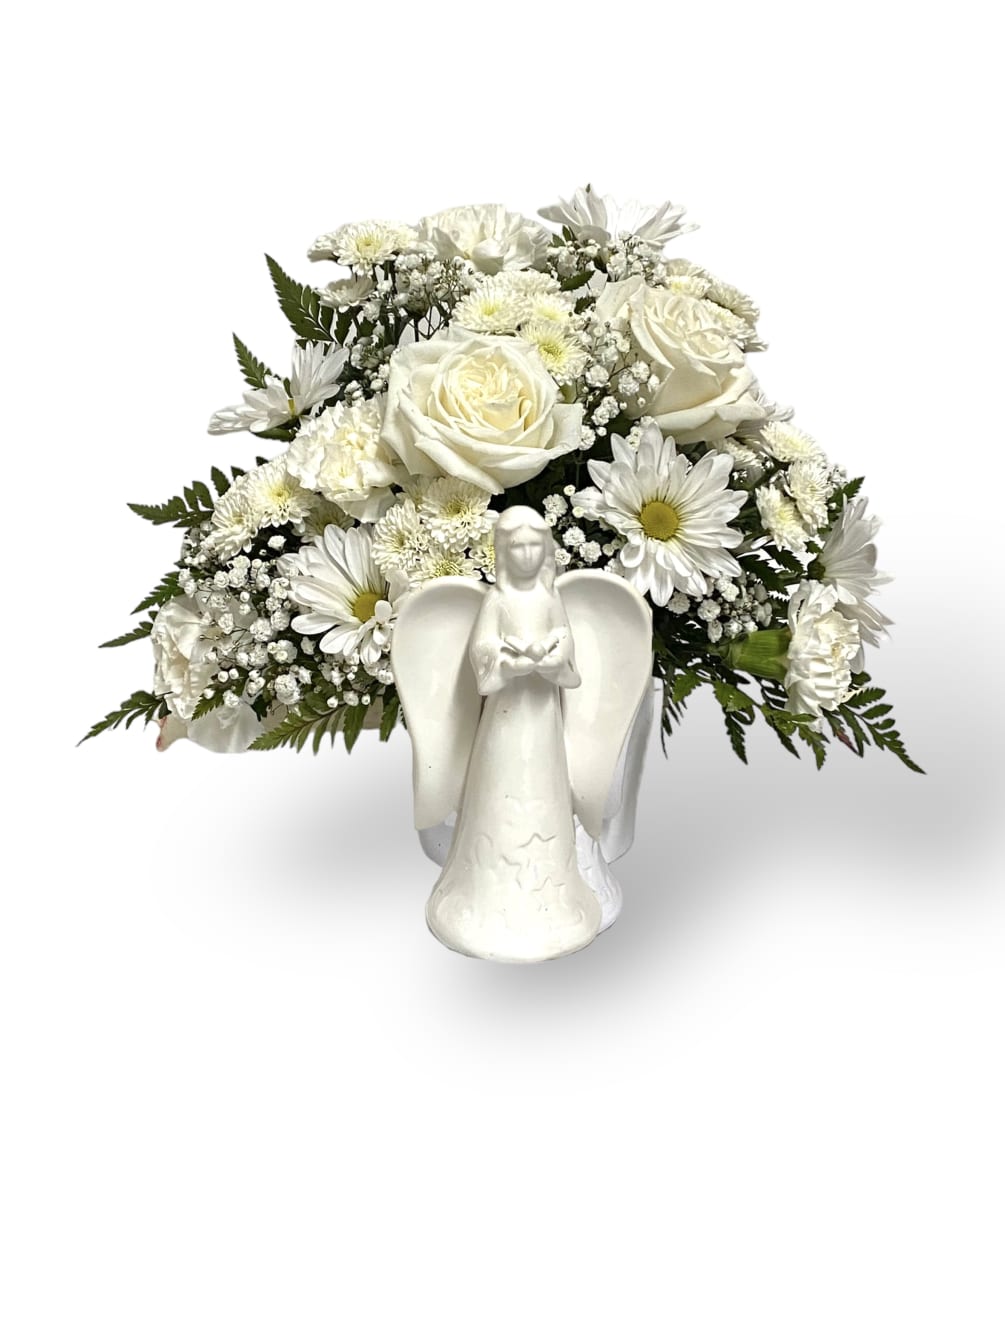 Simply elegant white  arrangement of Roses, carnations daisies, pom-poms, and babies